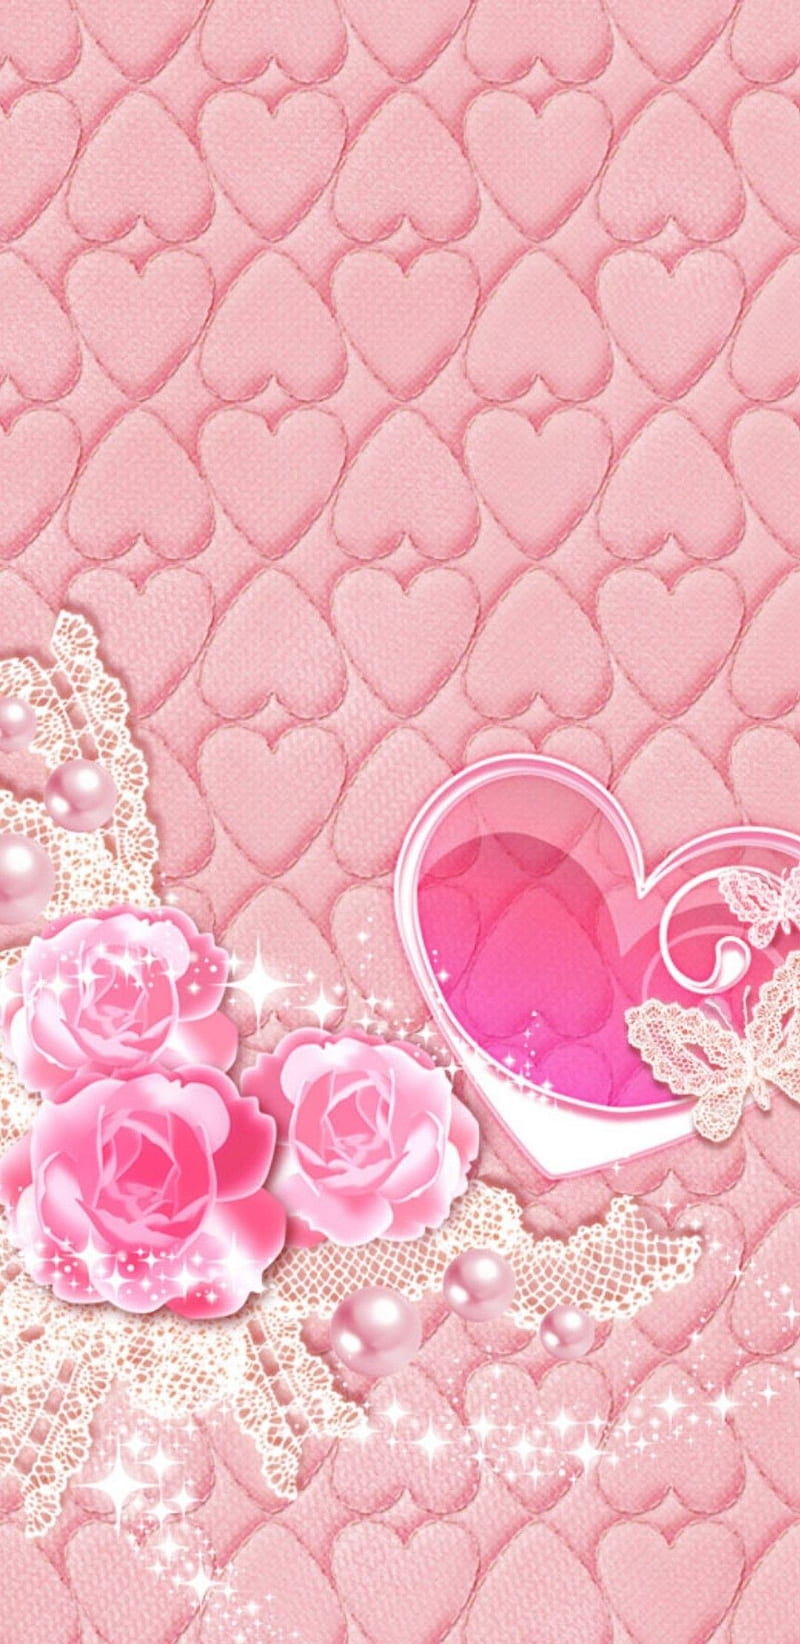 Crystal Heart, bonito, butterfly, girly, lace, pink, pretty, roses, sparkle, HD phone wallpaper